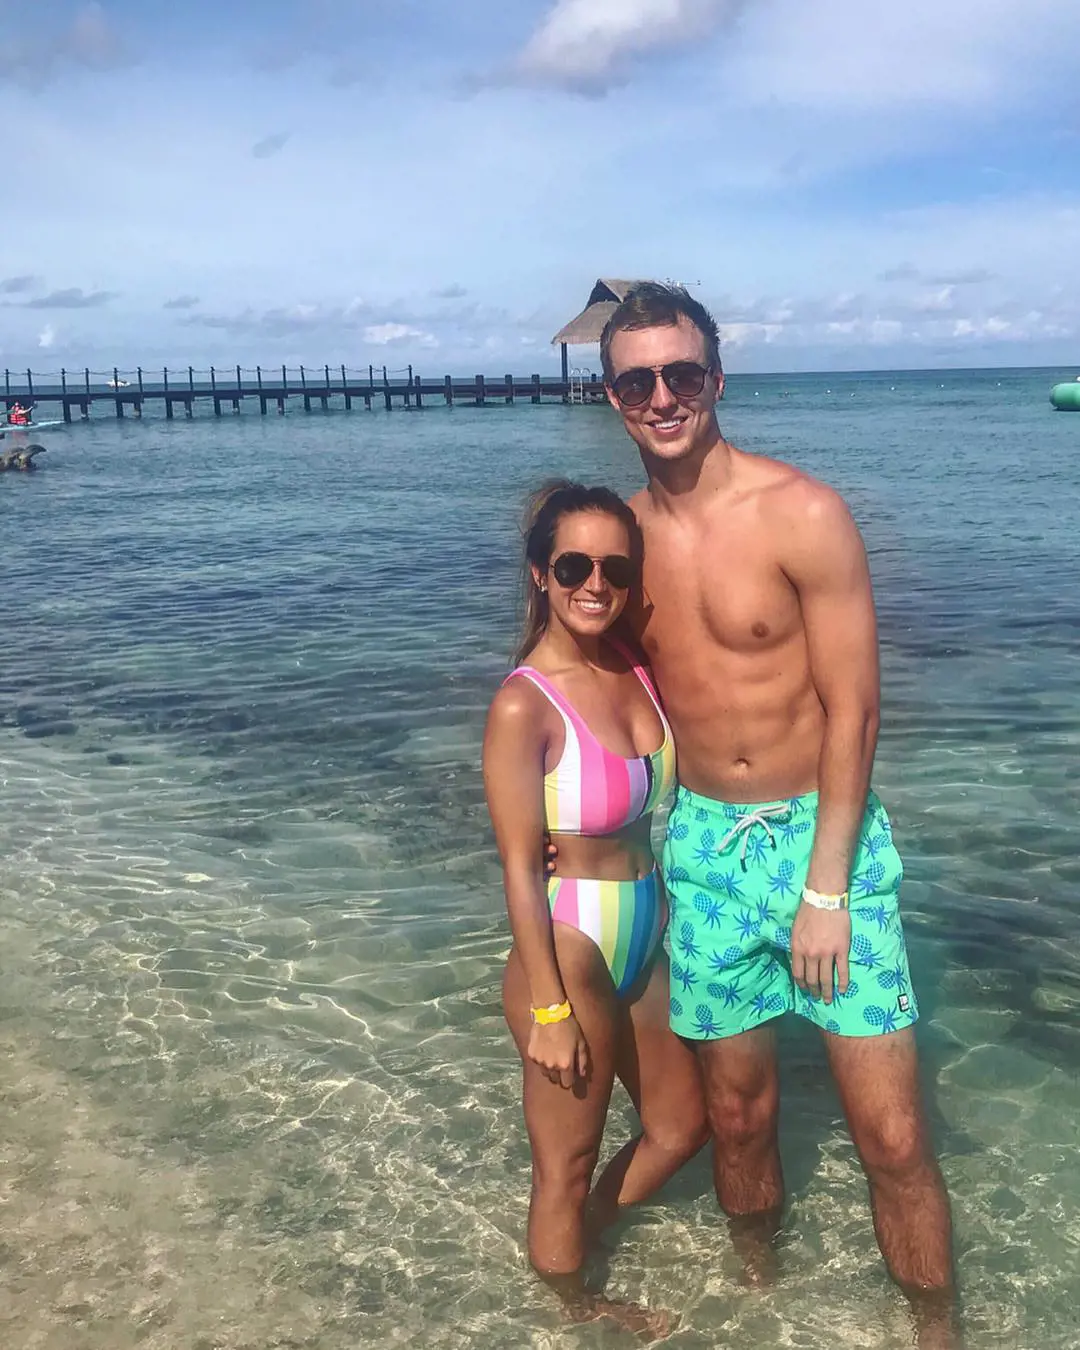 The shooting guard spent a beach vacation with Anna in 2018